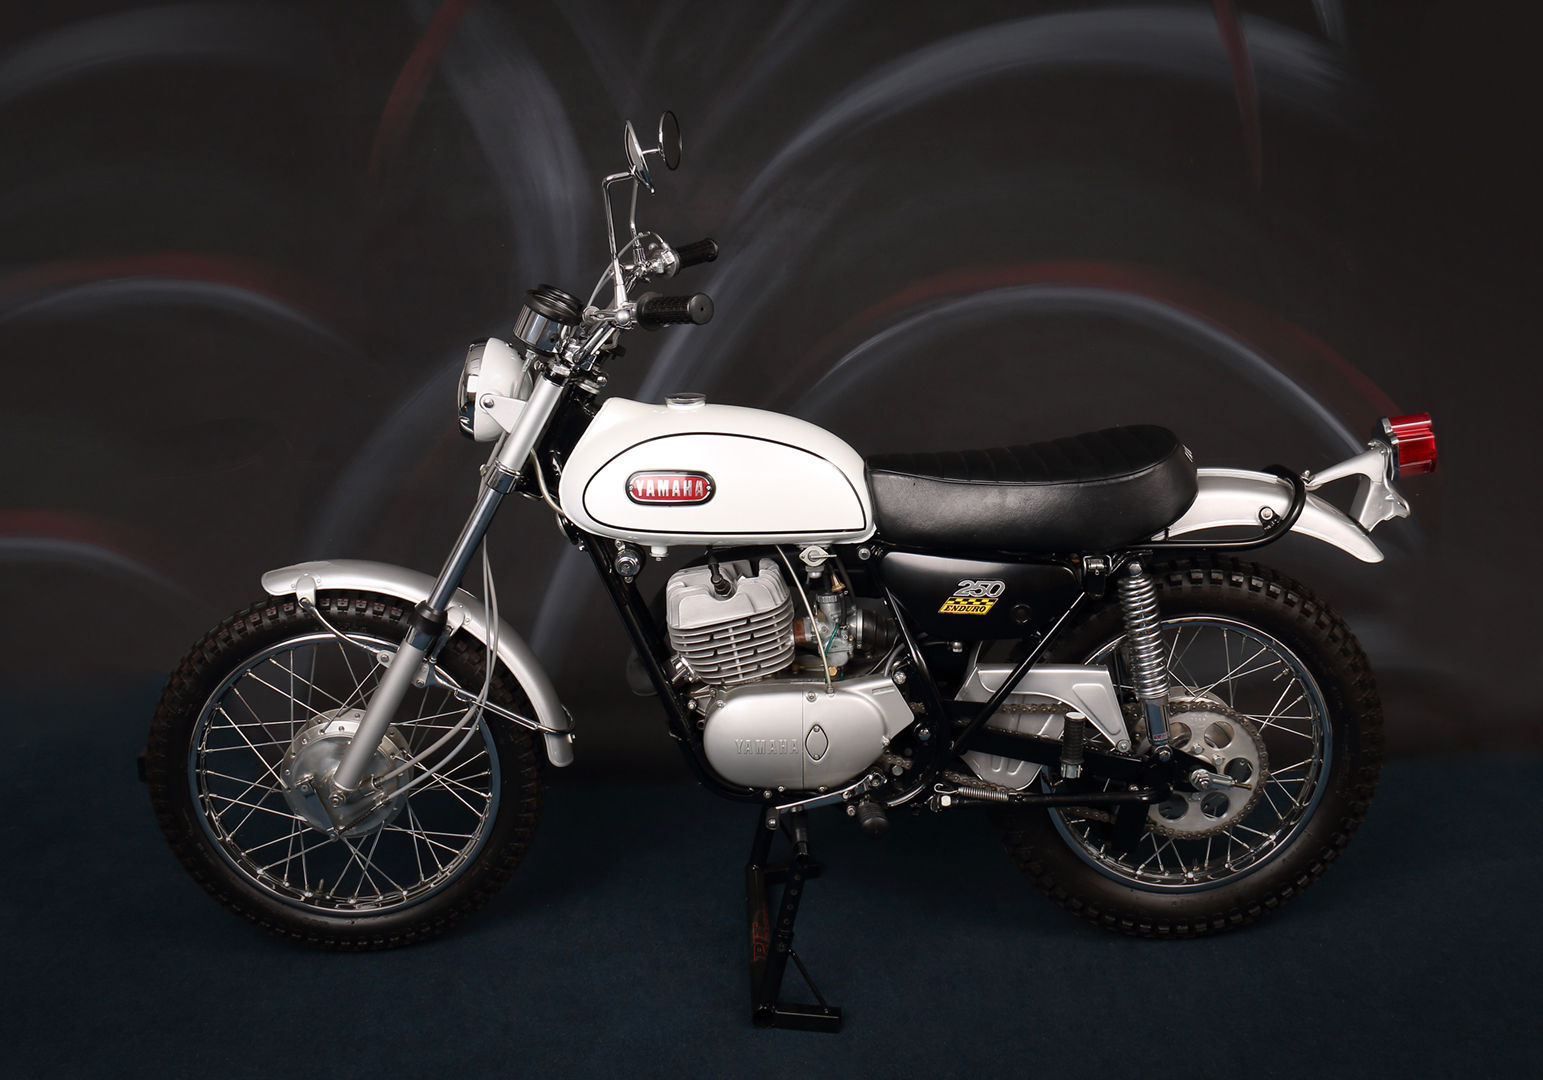 Yamaha DT1 250 - 1968 - Left Side View, Gas Tank, Seat and Motor.